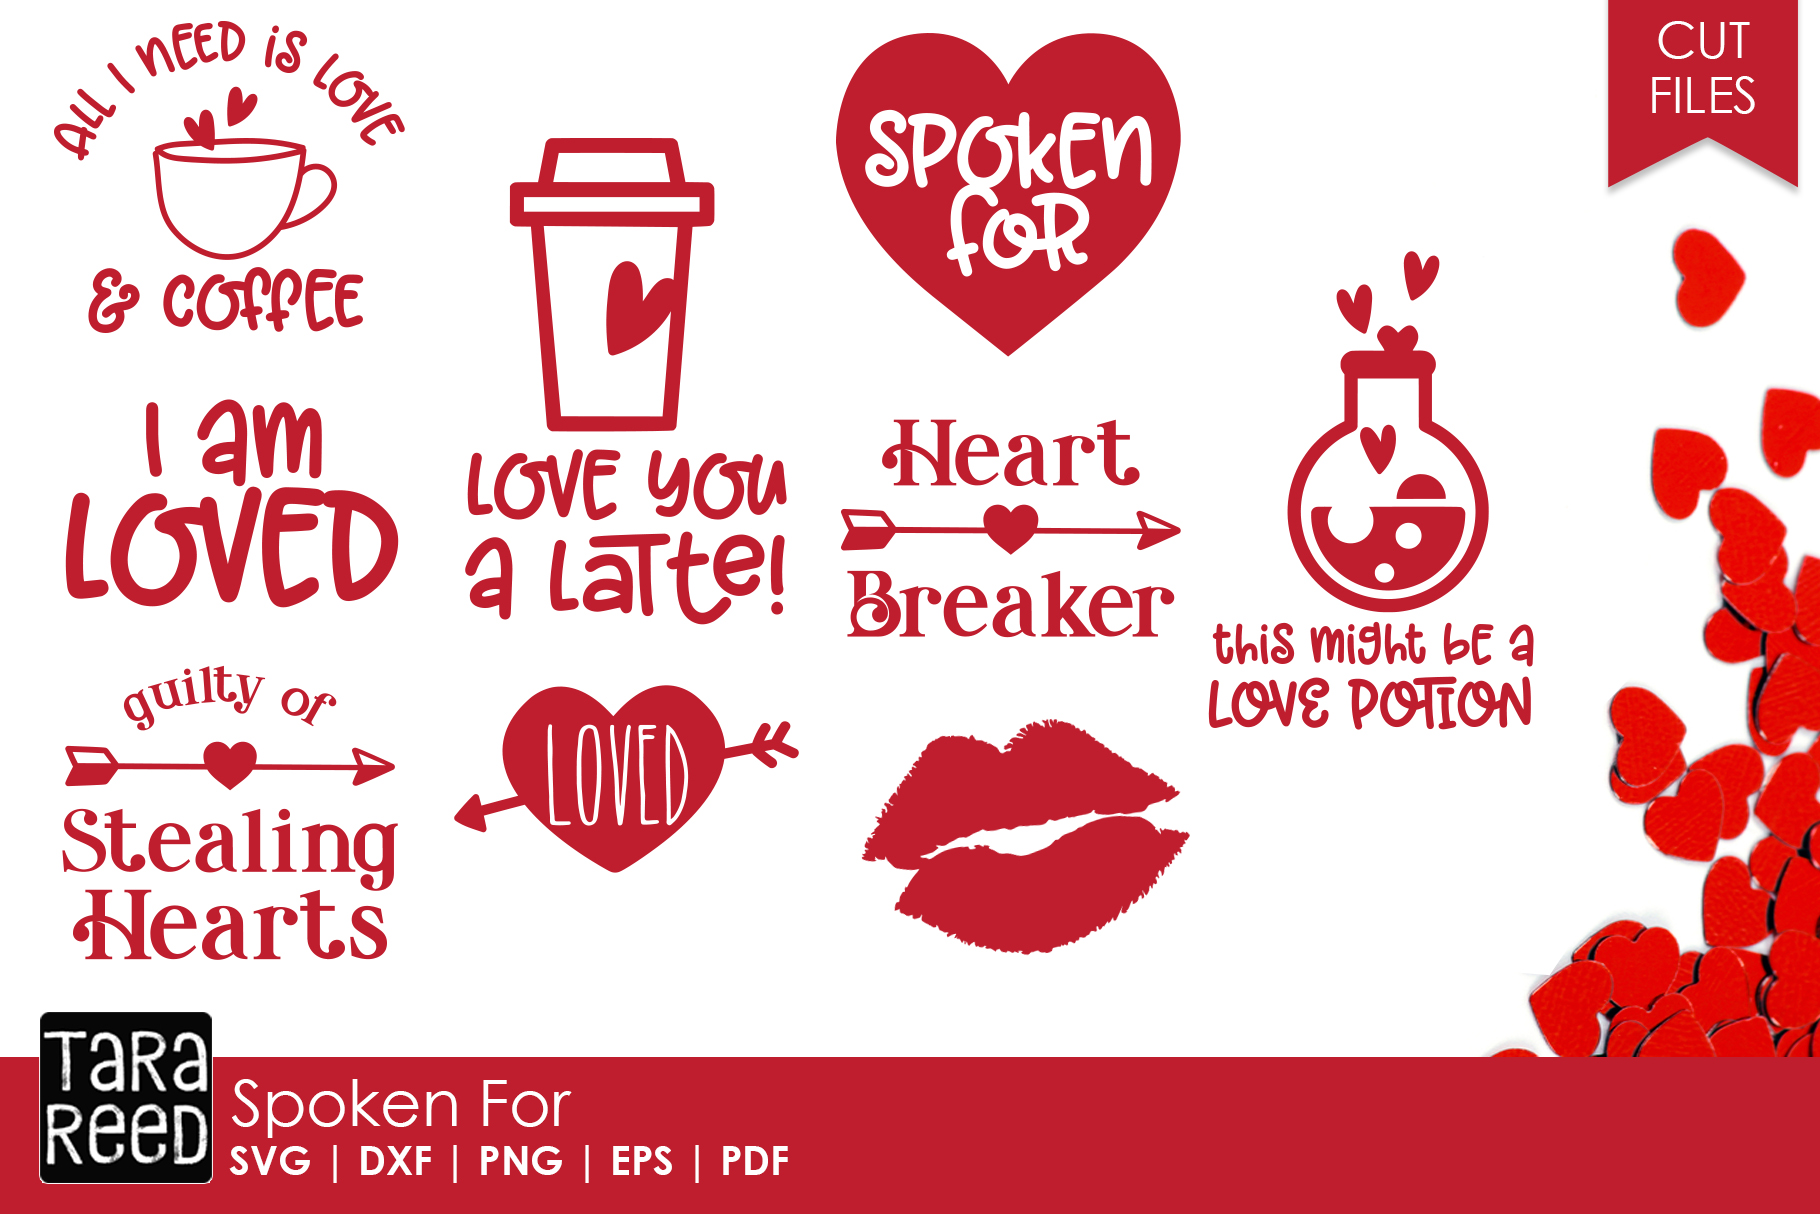 Spoken for - Valentine's Day SVG and Cut Files for Crafters (189774